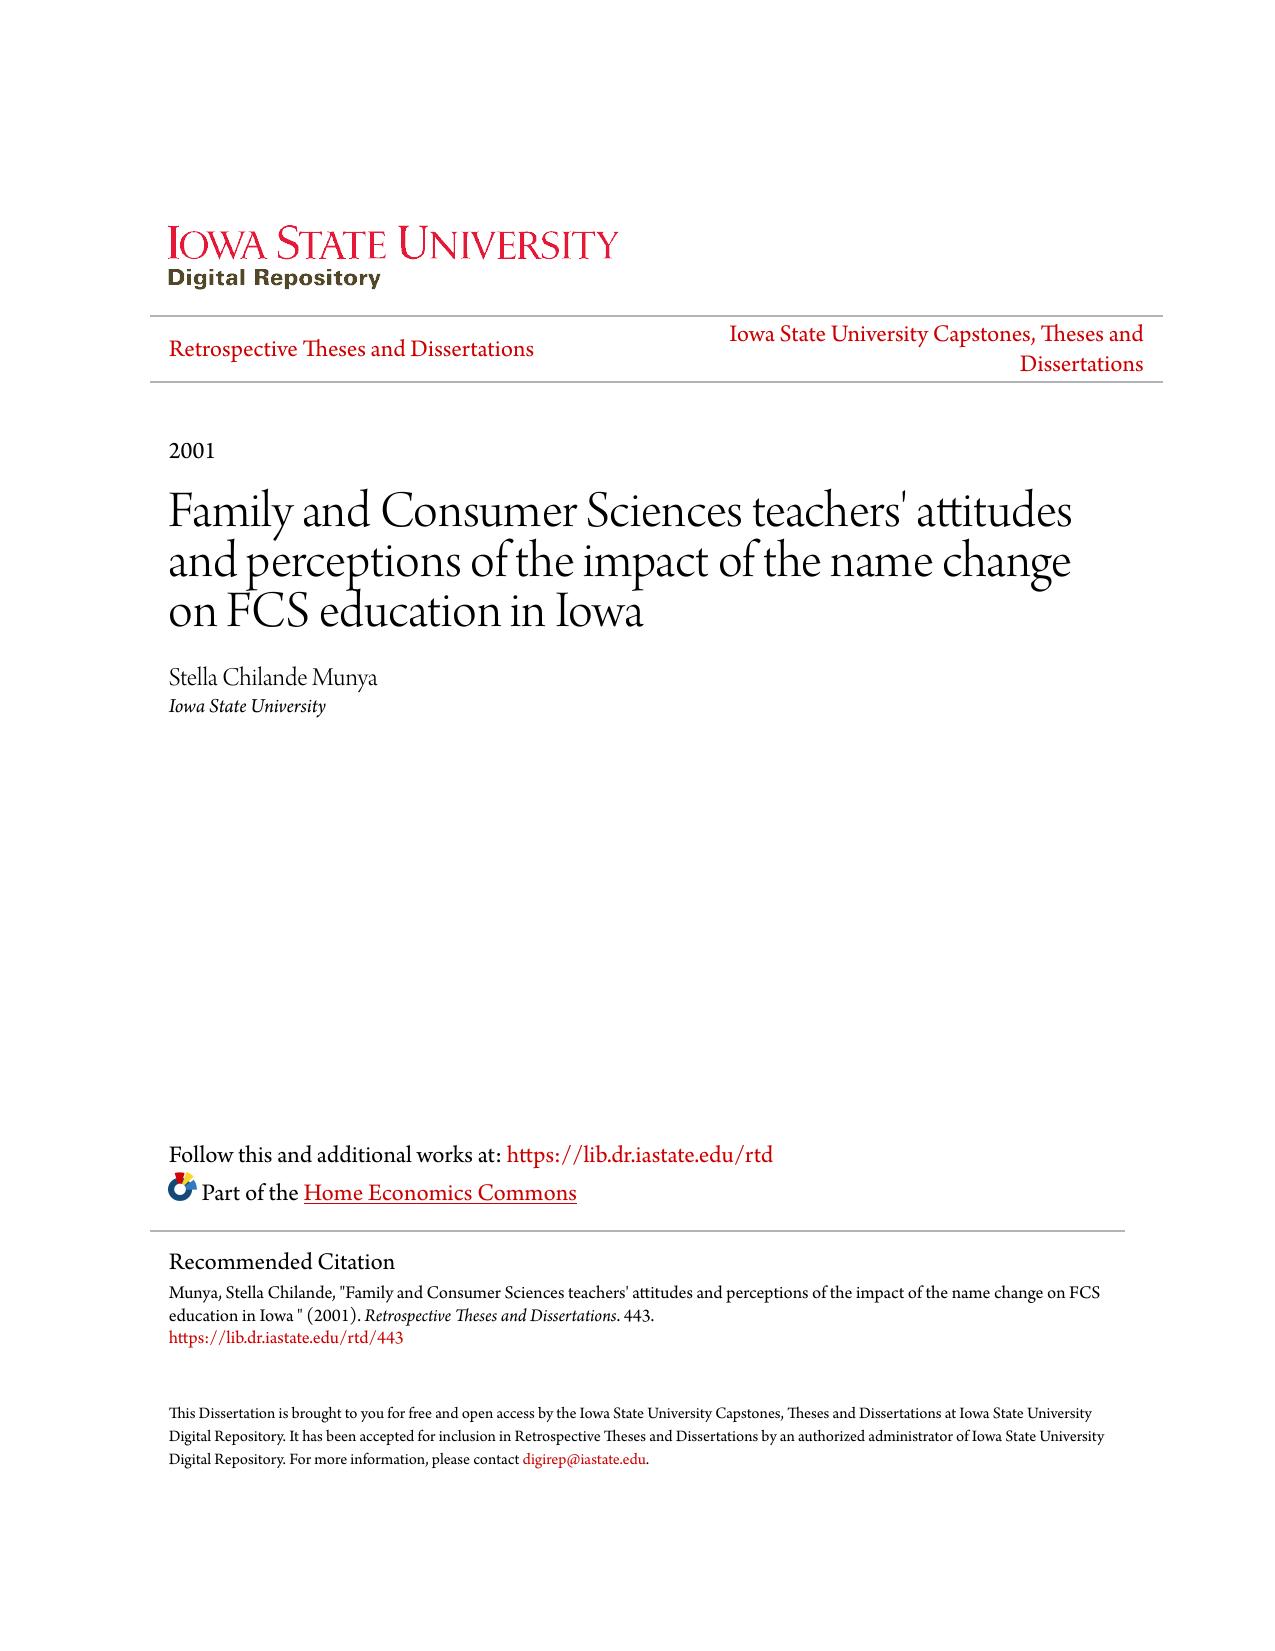 Family and Consumer Sciences teachers' attitudes and perceptions of the impact of the name change on FCS education in Iowa